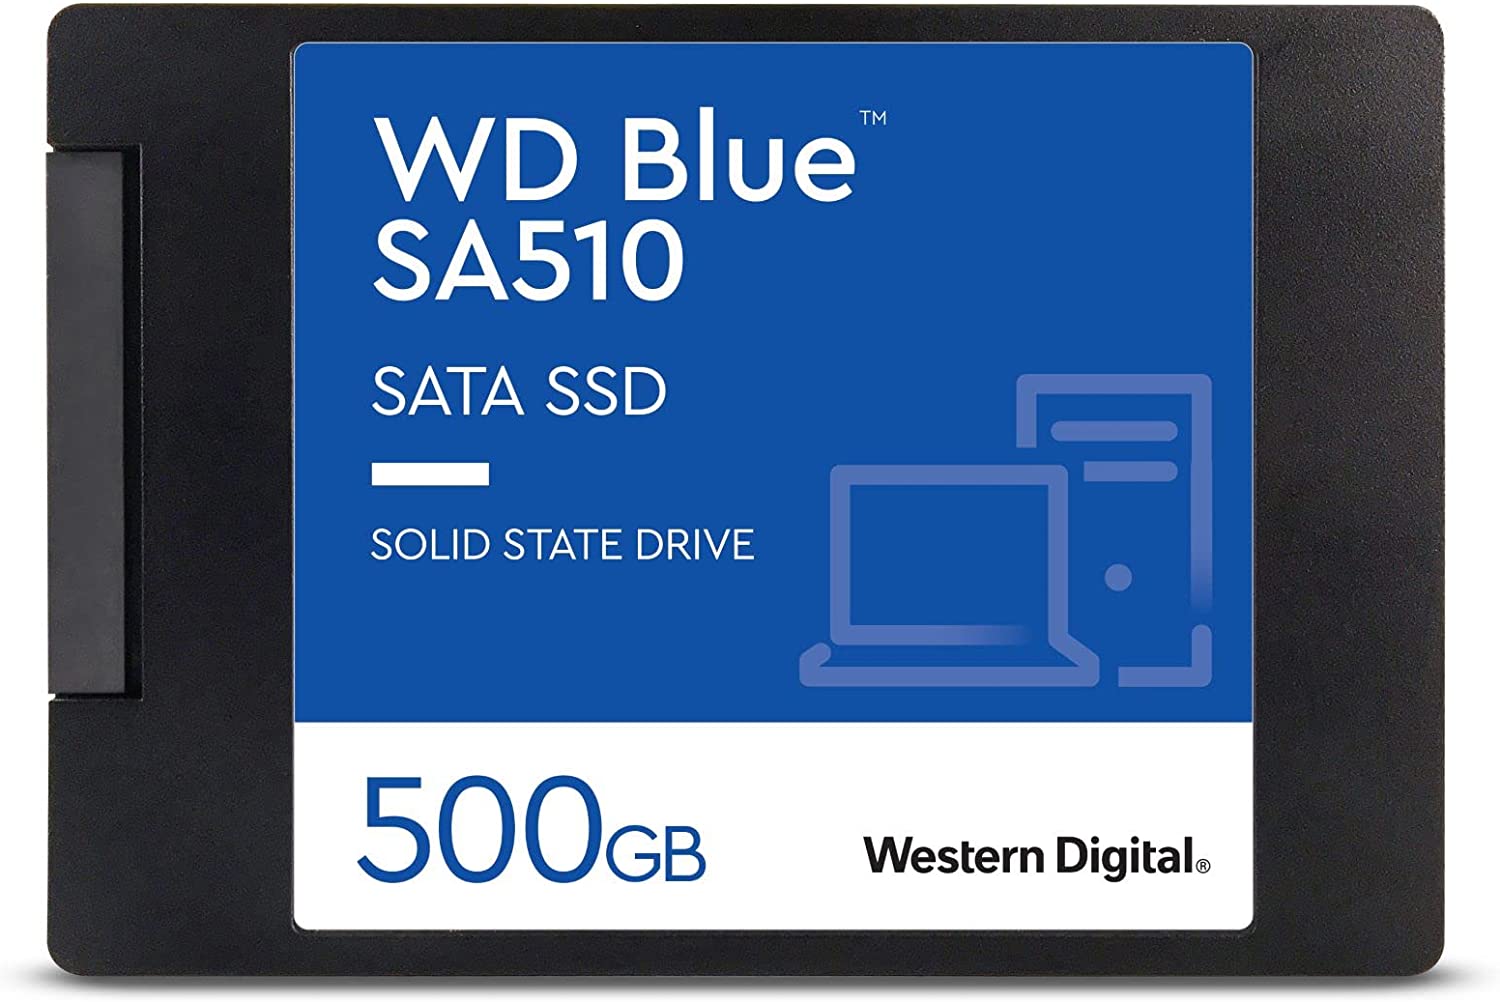 How To Install A WD Blue M.2 500GB Internal SSD Solid State Drive – SATA 6GB/s